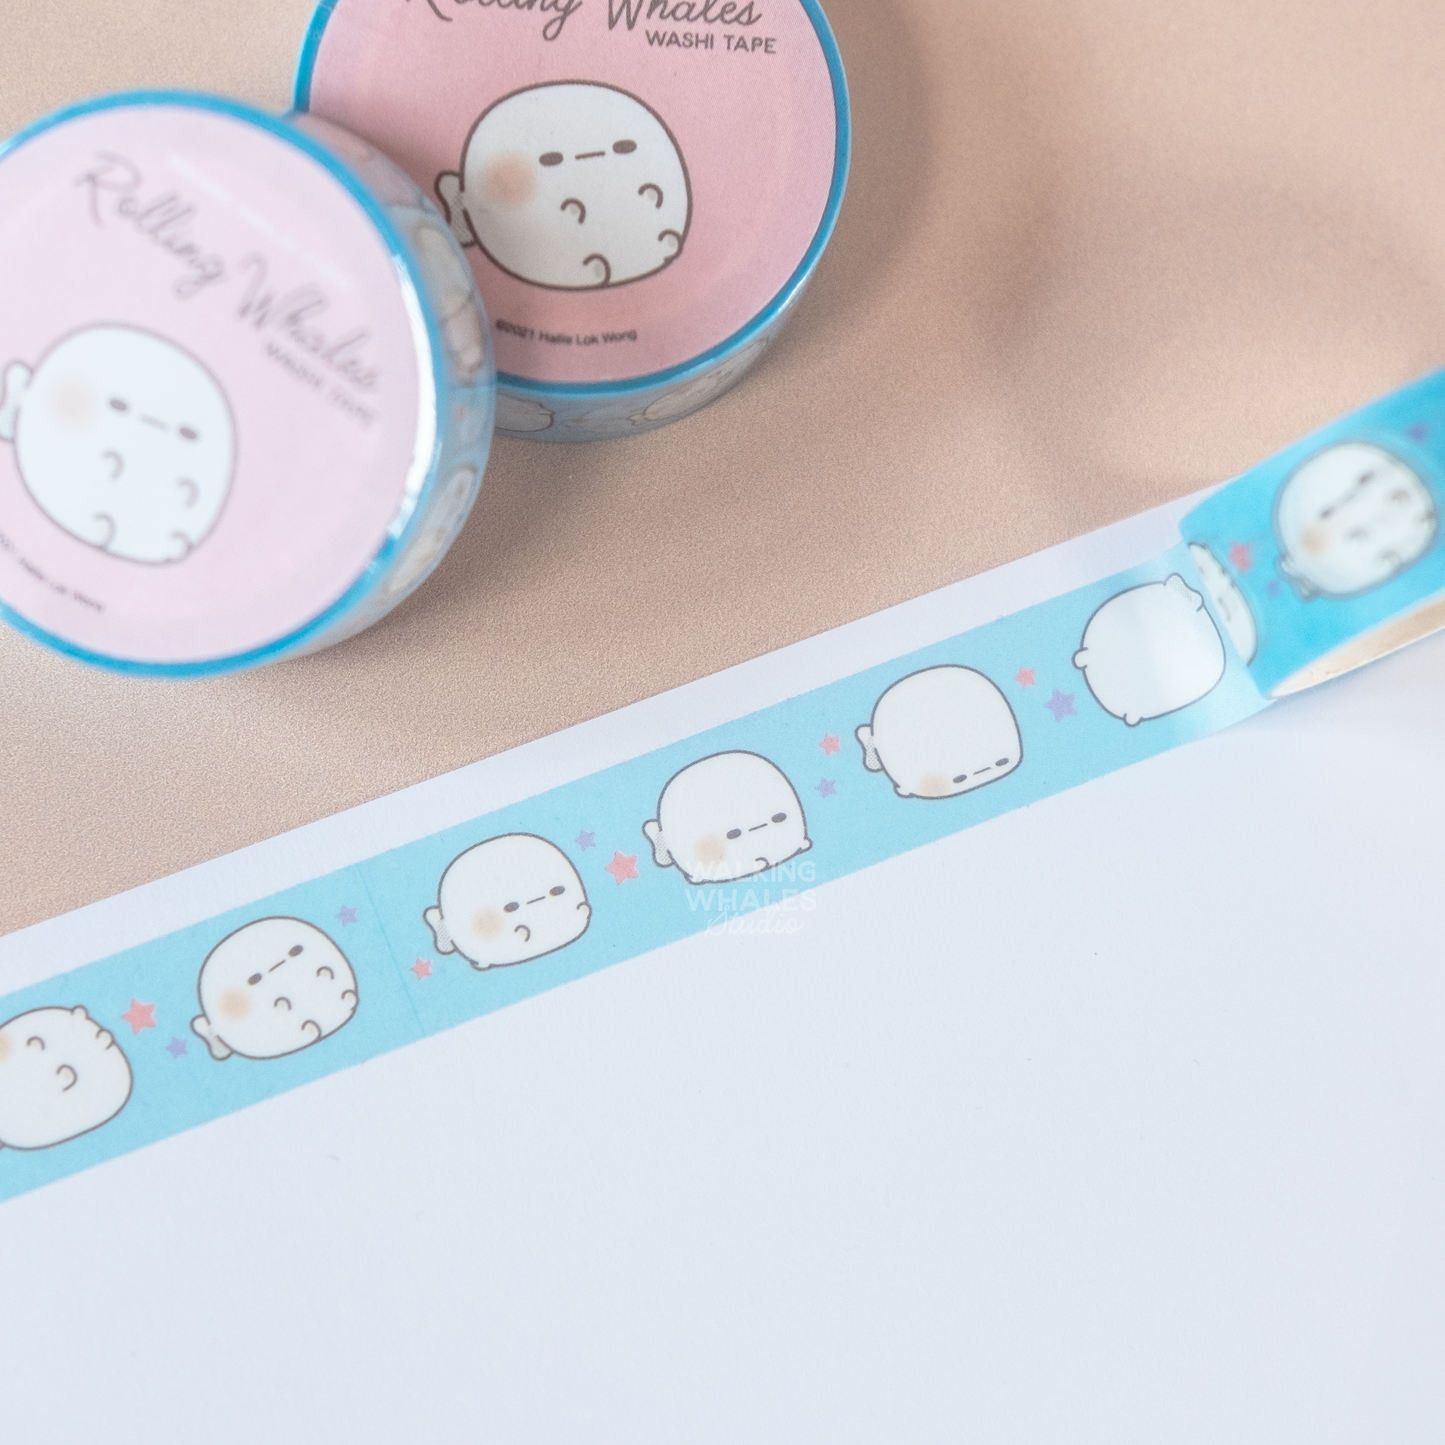 Rolling Whales Washi Tape